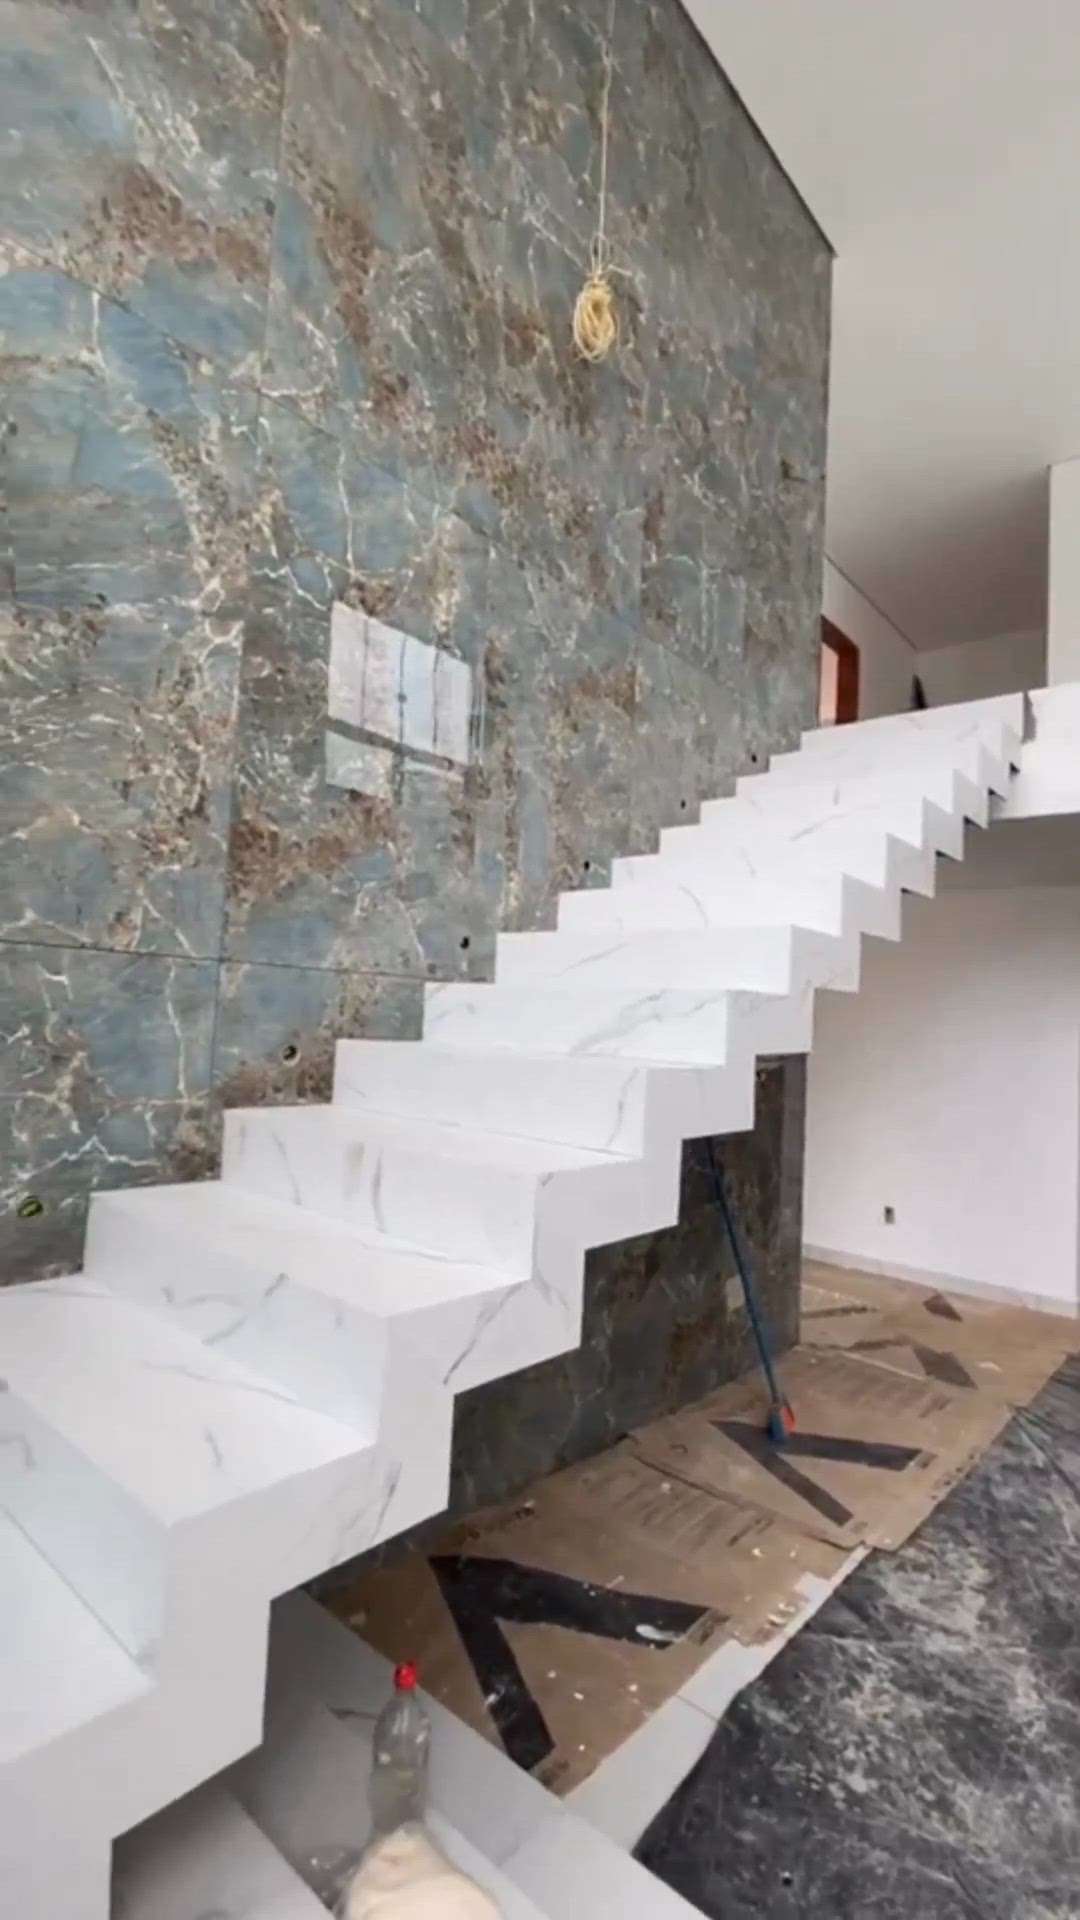 tiles for wall and steps #tiles #walltiles